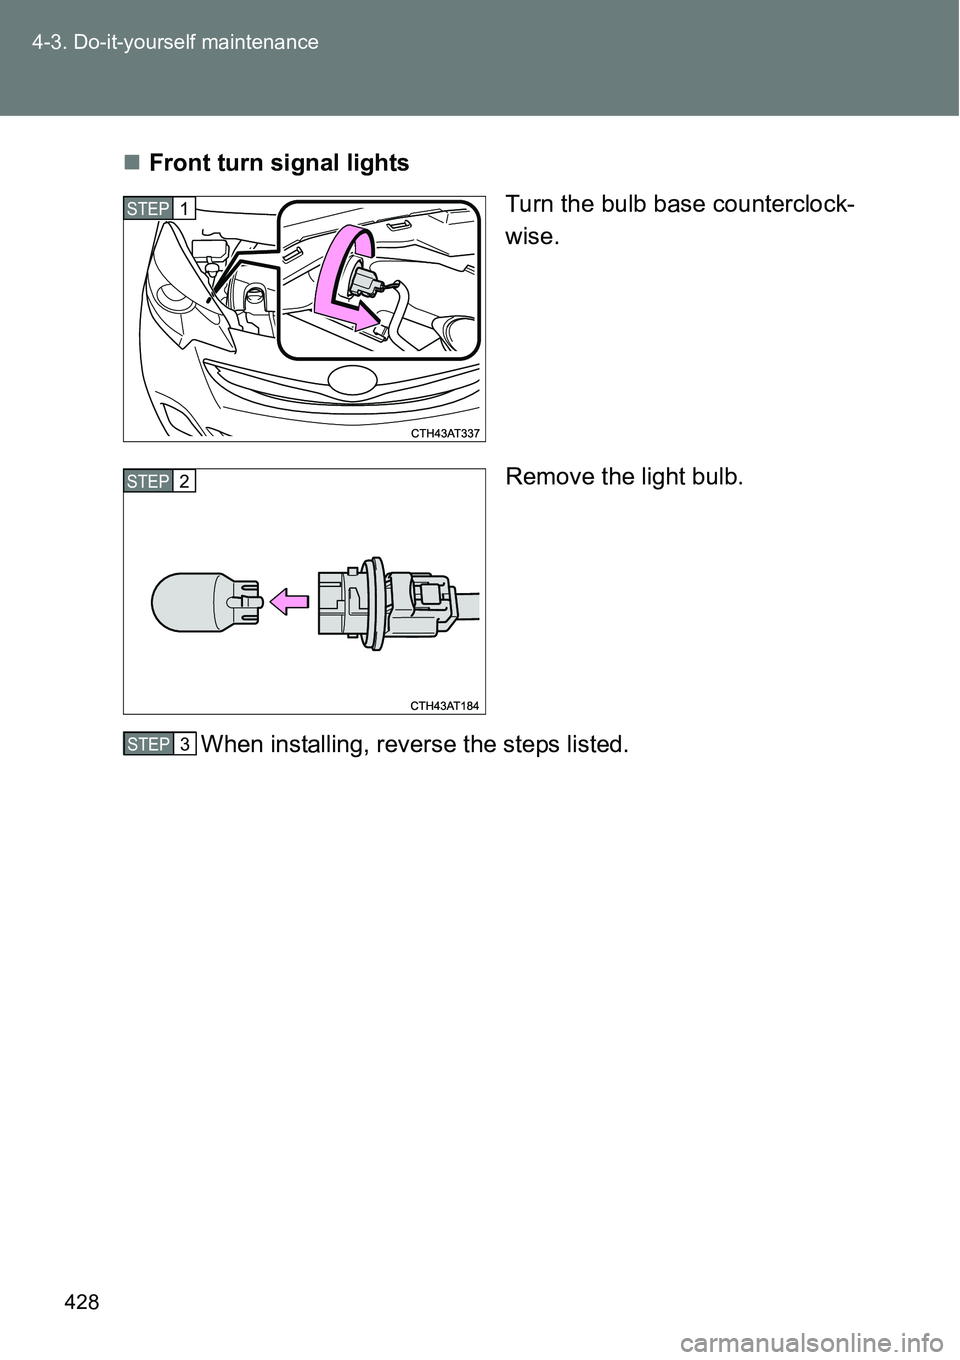 TOYOTA VERSO S 2015  Owners Manual 428 4-3. Do-it-yourself maintenance
Front turn signal lights
Turn the bulb base counterclock-
wise.
Remove the light bulb.
When installing, reverse the steps listed.
STEP1
STEP2
STEP1STEP6STEP3 